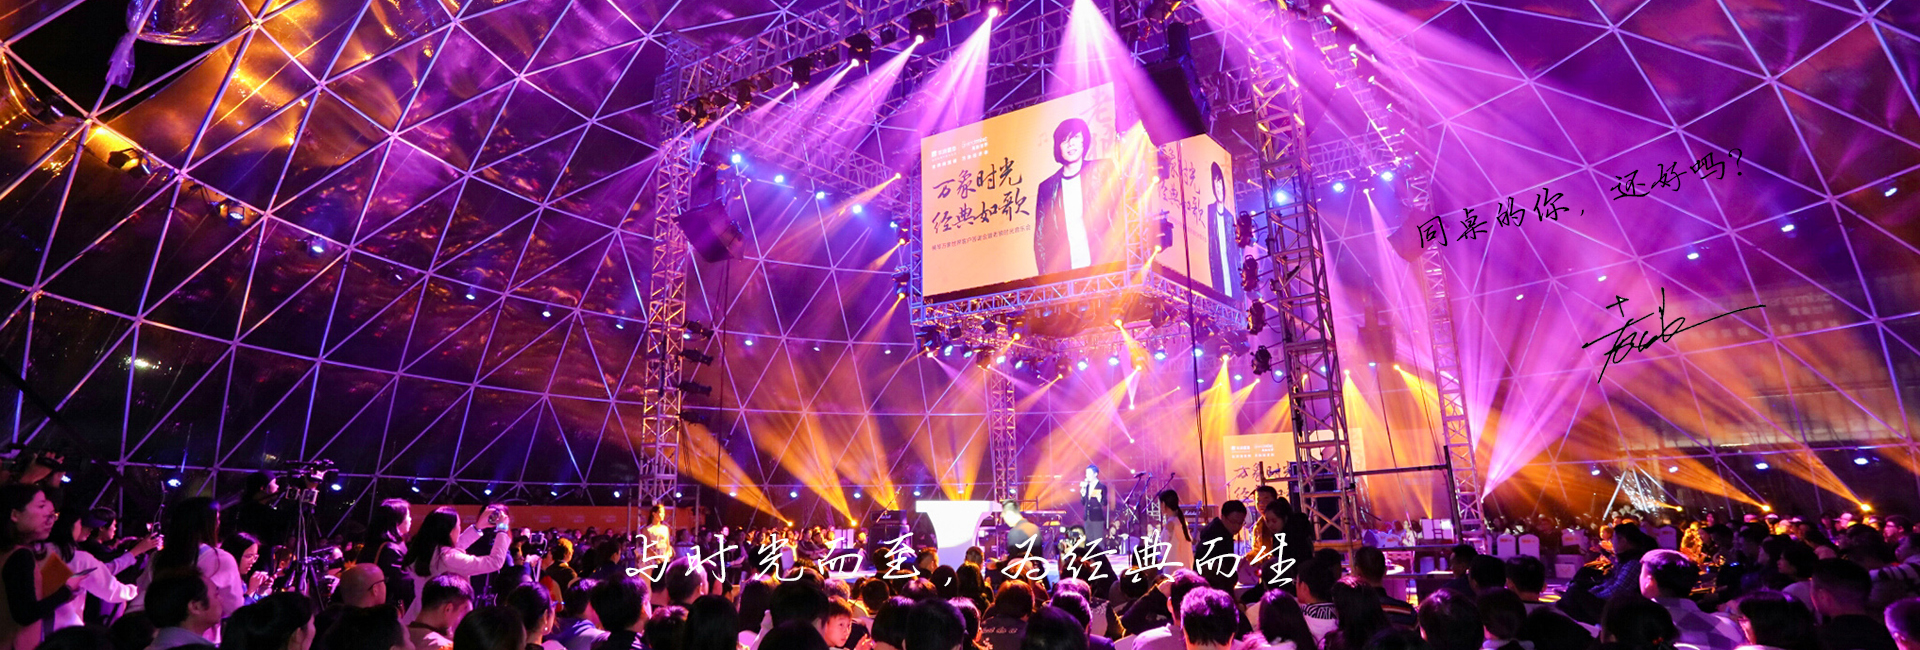 concert-dome-festival-structures-music-event-dome–Design-Supplier-12.jpg